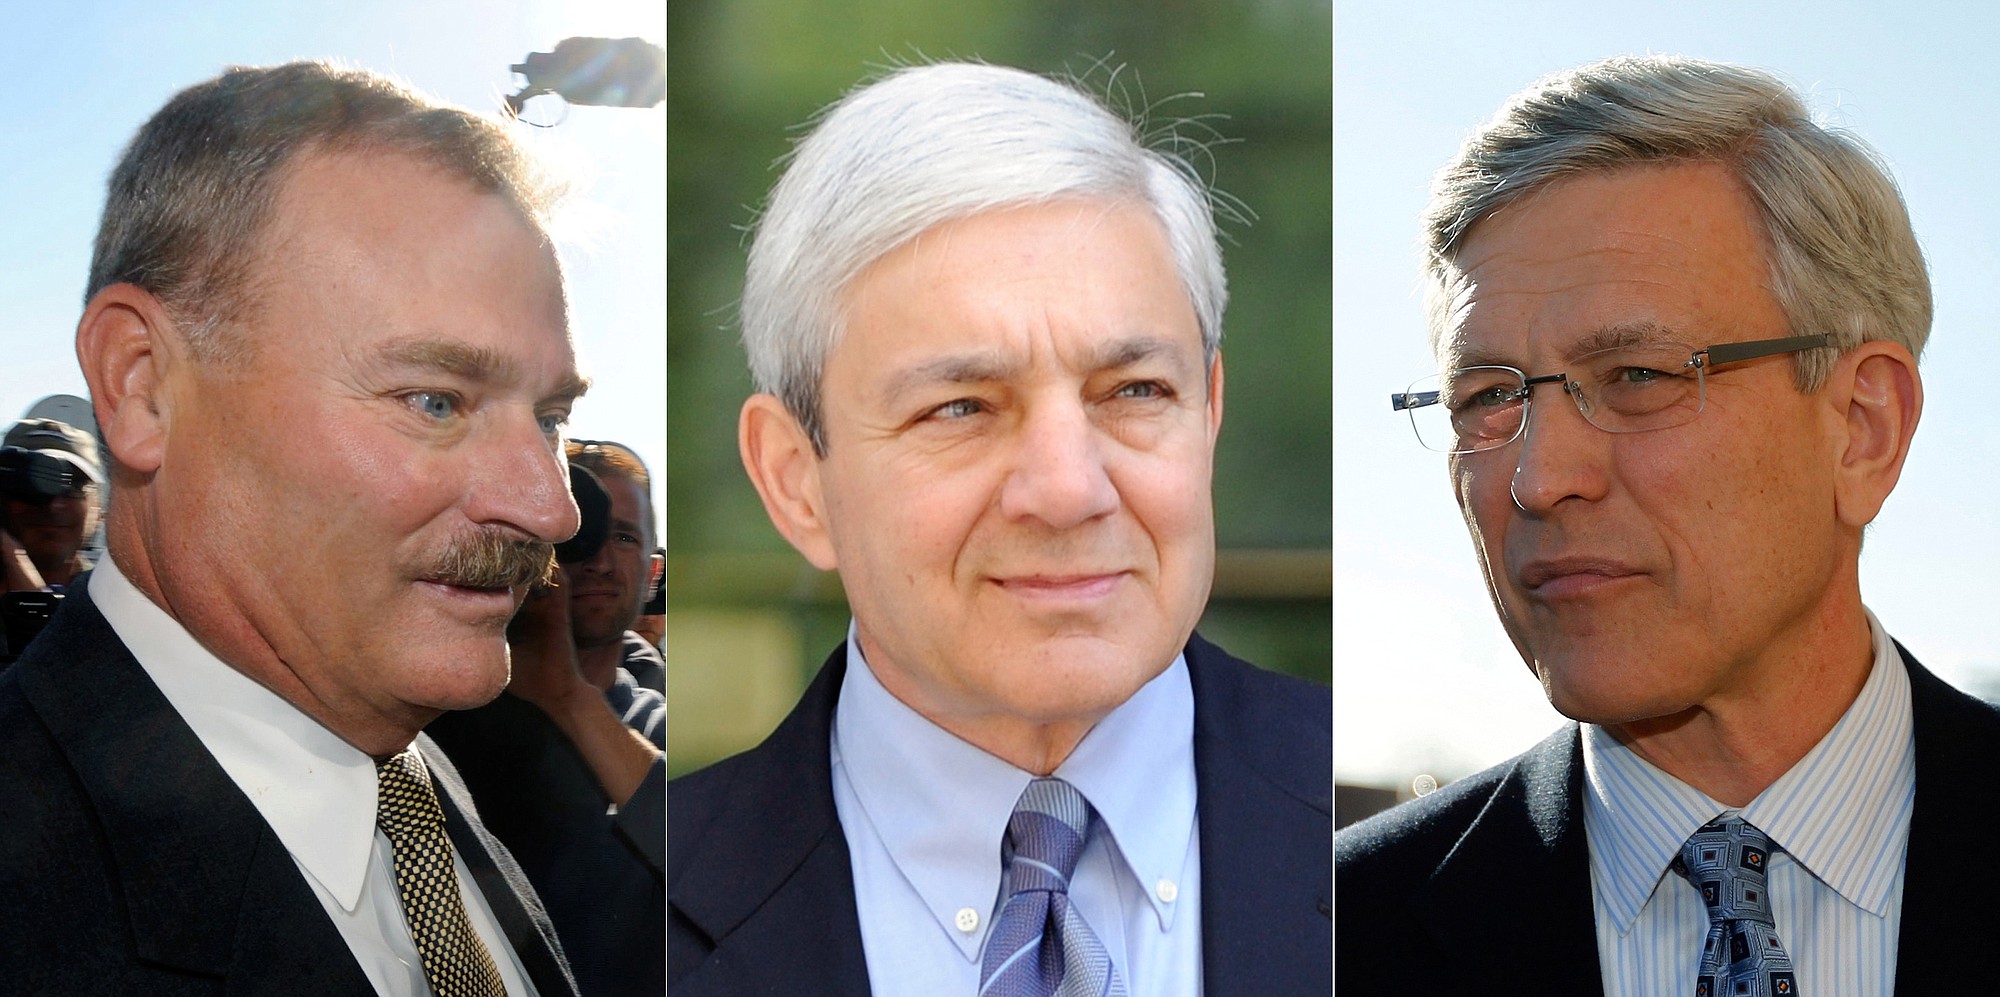 This combination of 2011 and 2013 photo shows, from left, former Penn State vice president Gary Schultz, former Penn State president Graham Spanier, and former Penn State director of athletics Tim Curley in Harrisburg, Pa.